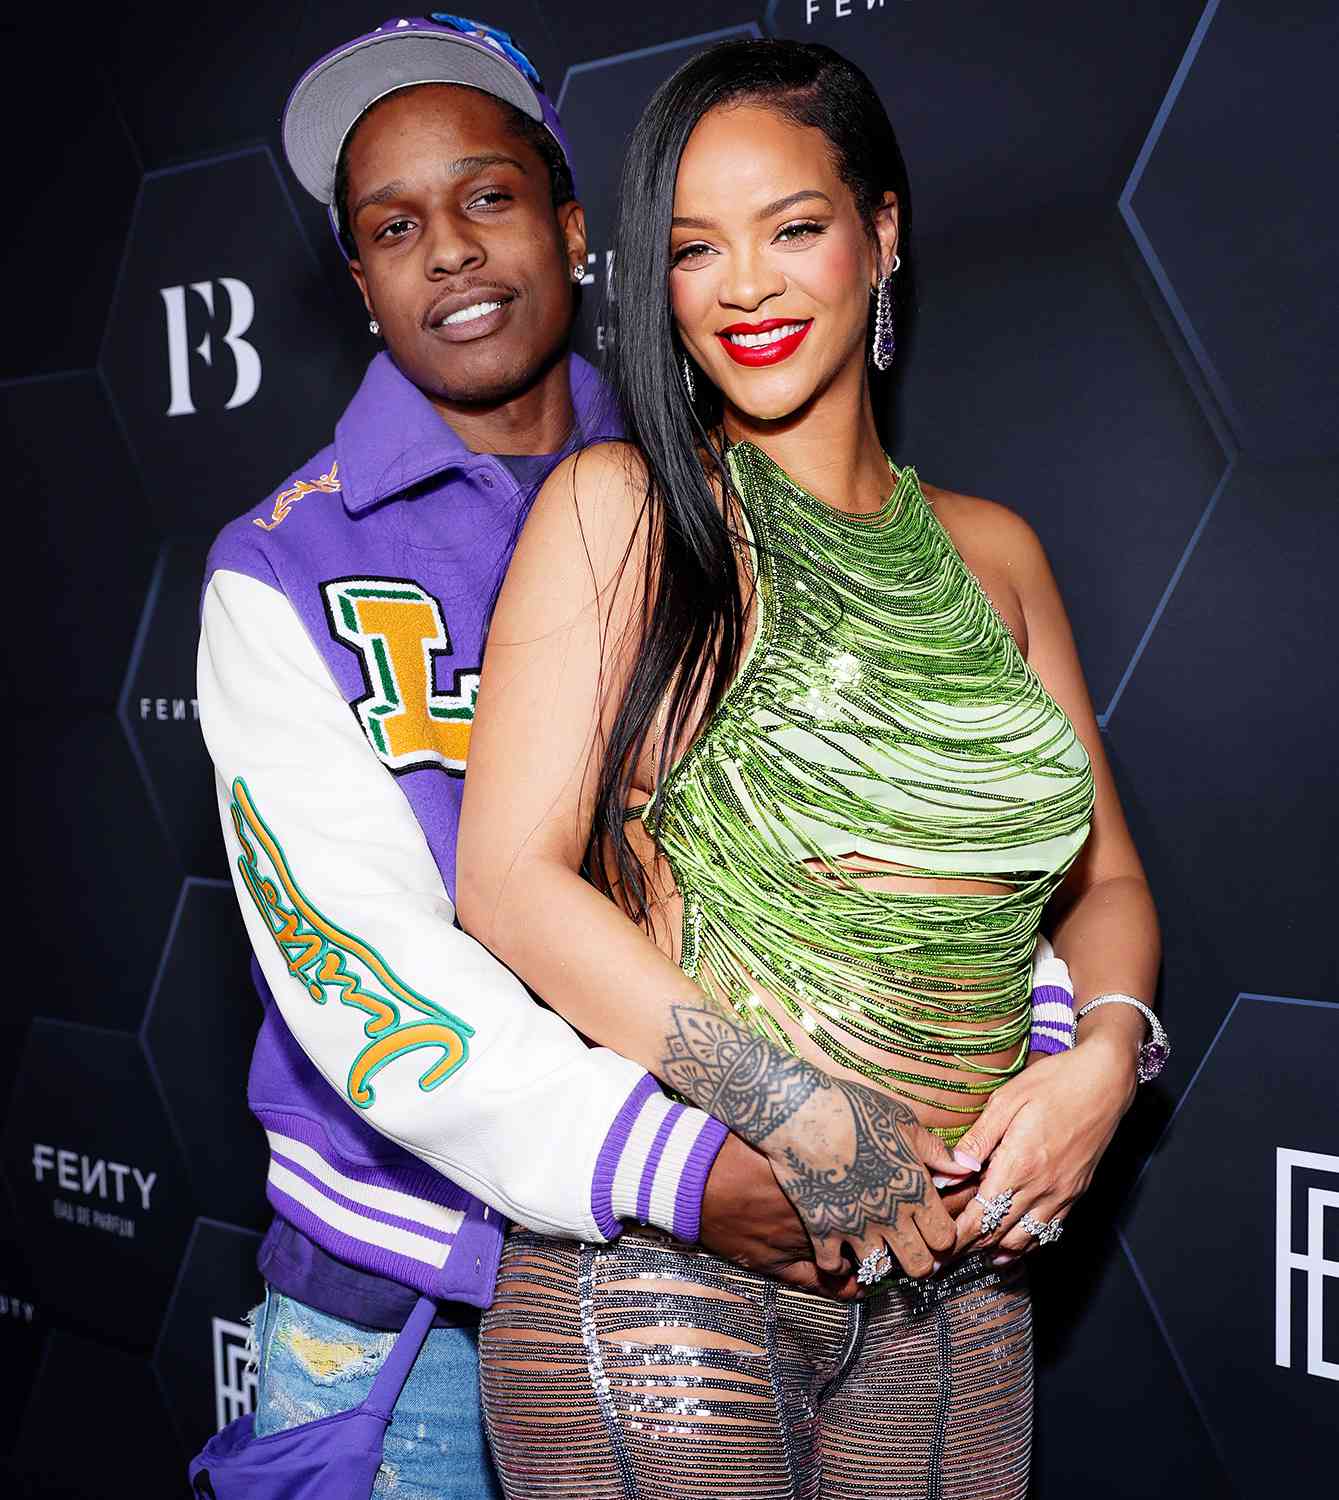 Pregnant Rihanna, Boyfriend A$AP Rocky Pose in Coordinating Outfits | PEOPLE.com